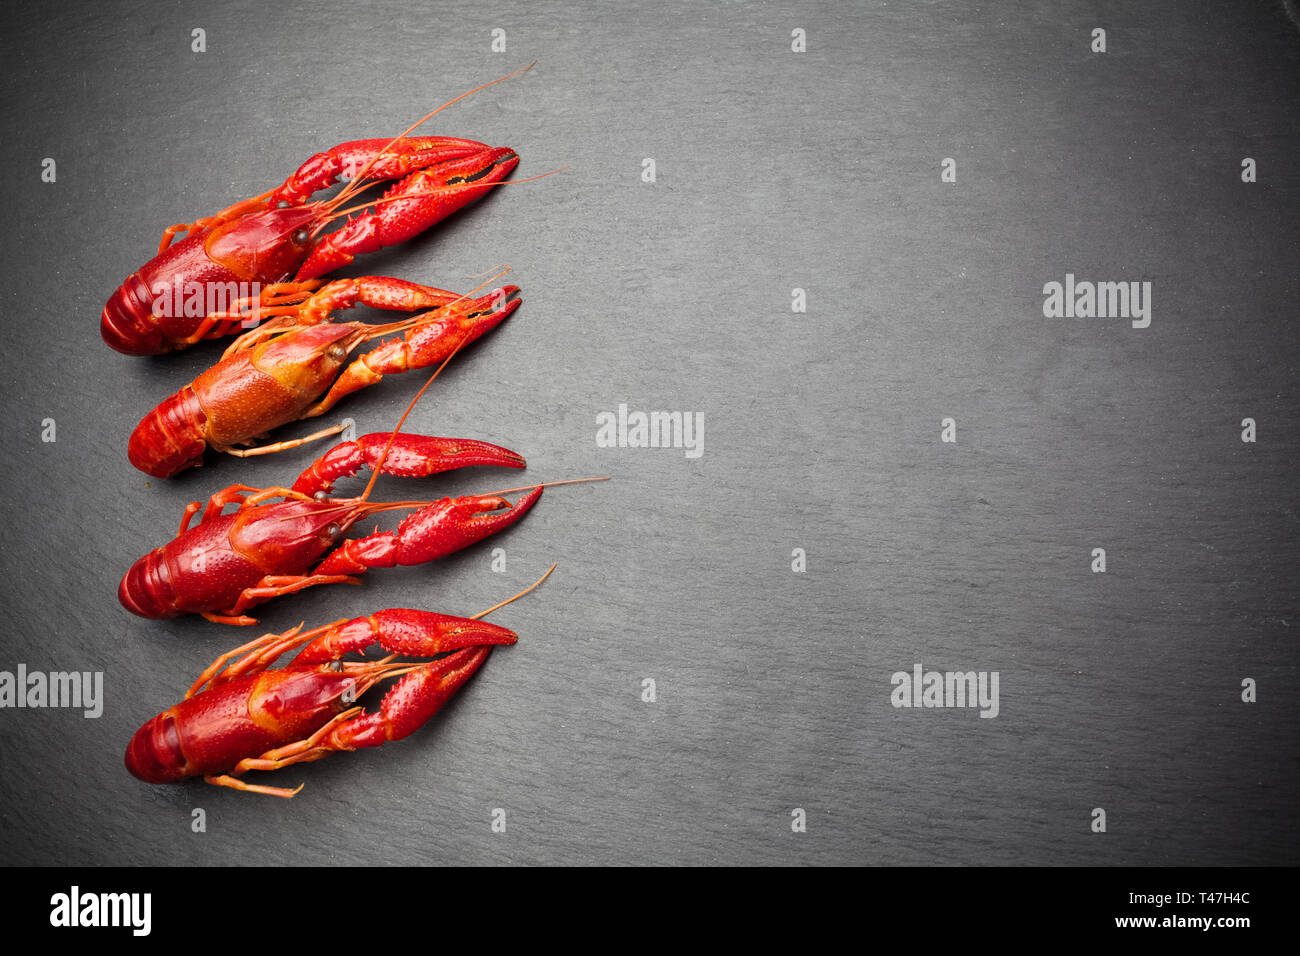 Lobster. Seafood. On a black slate background. Top view. Free space for your text. Stock Photo